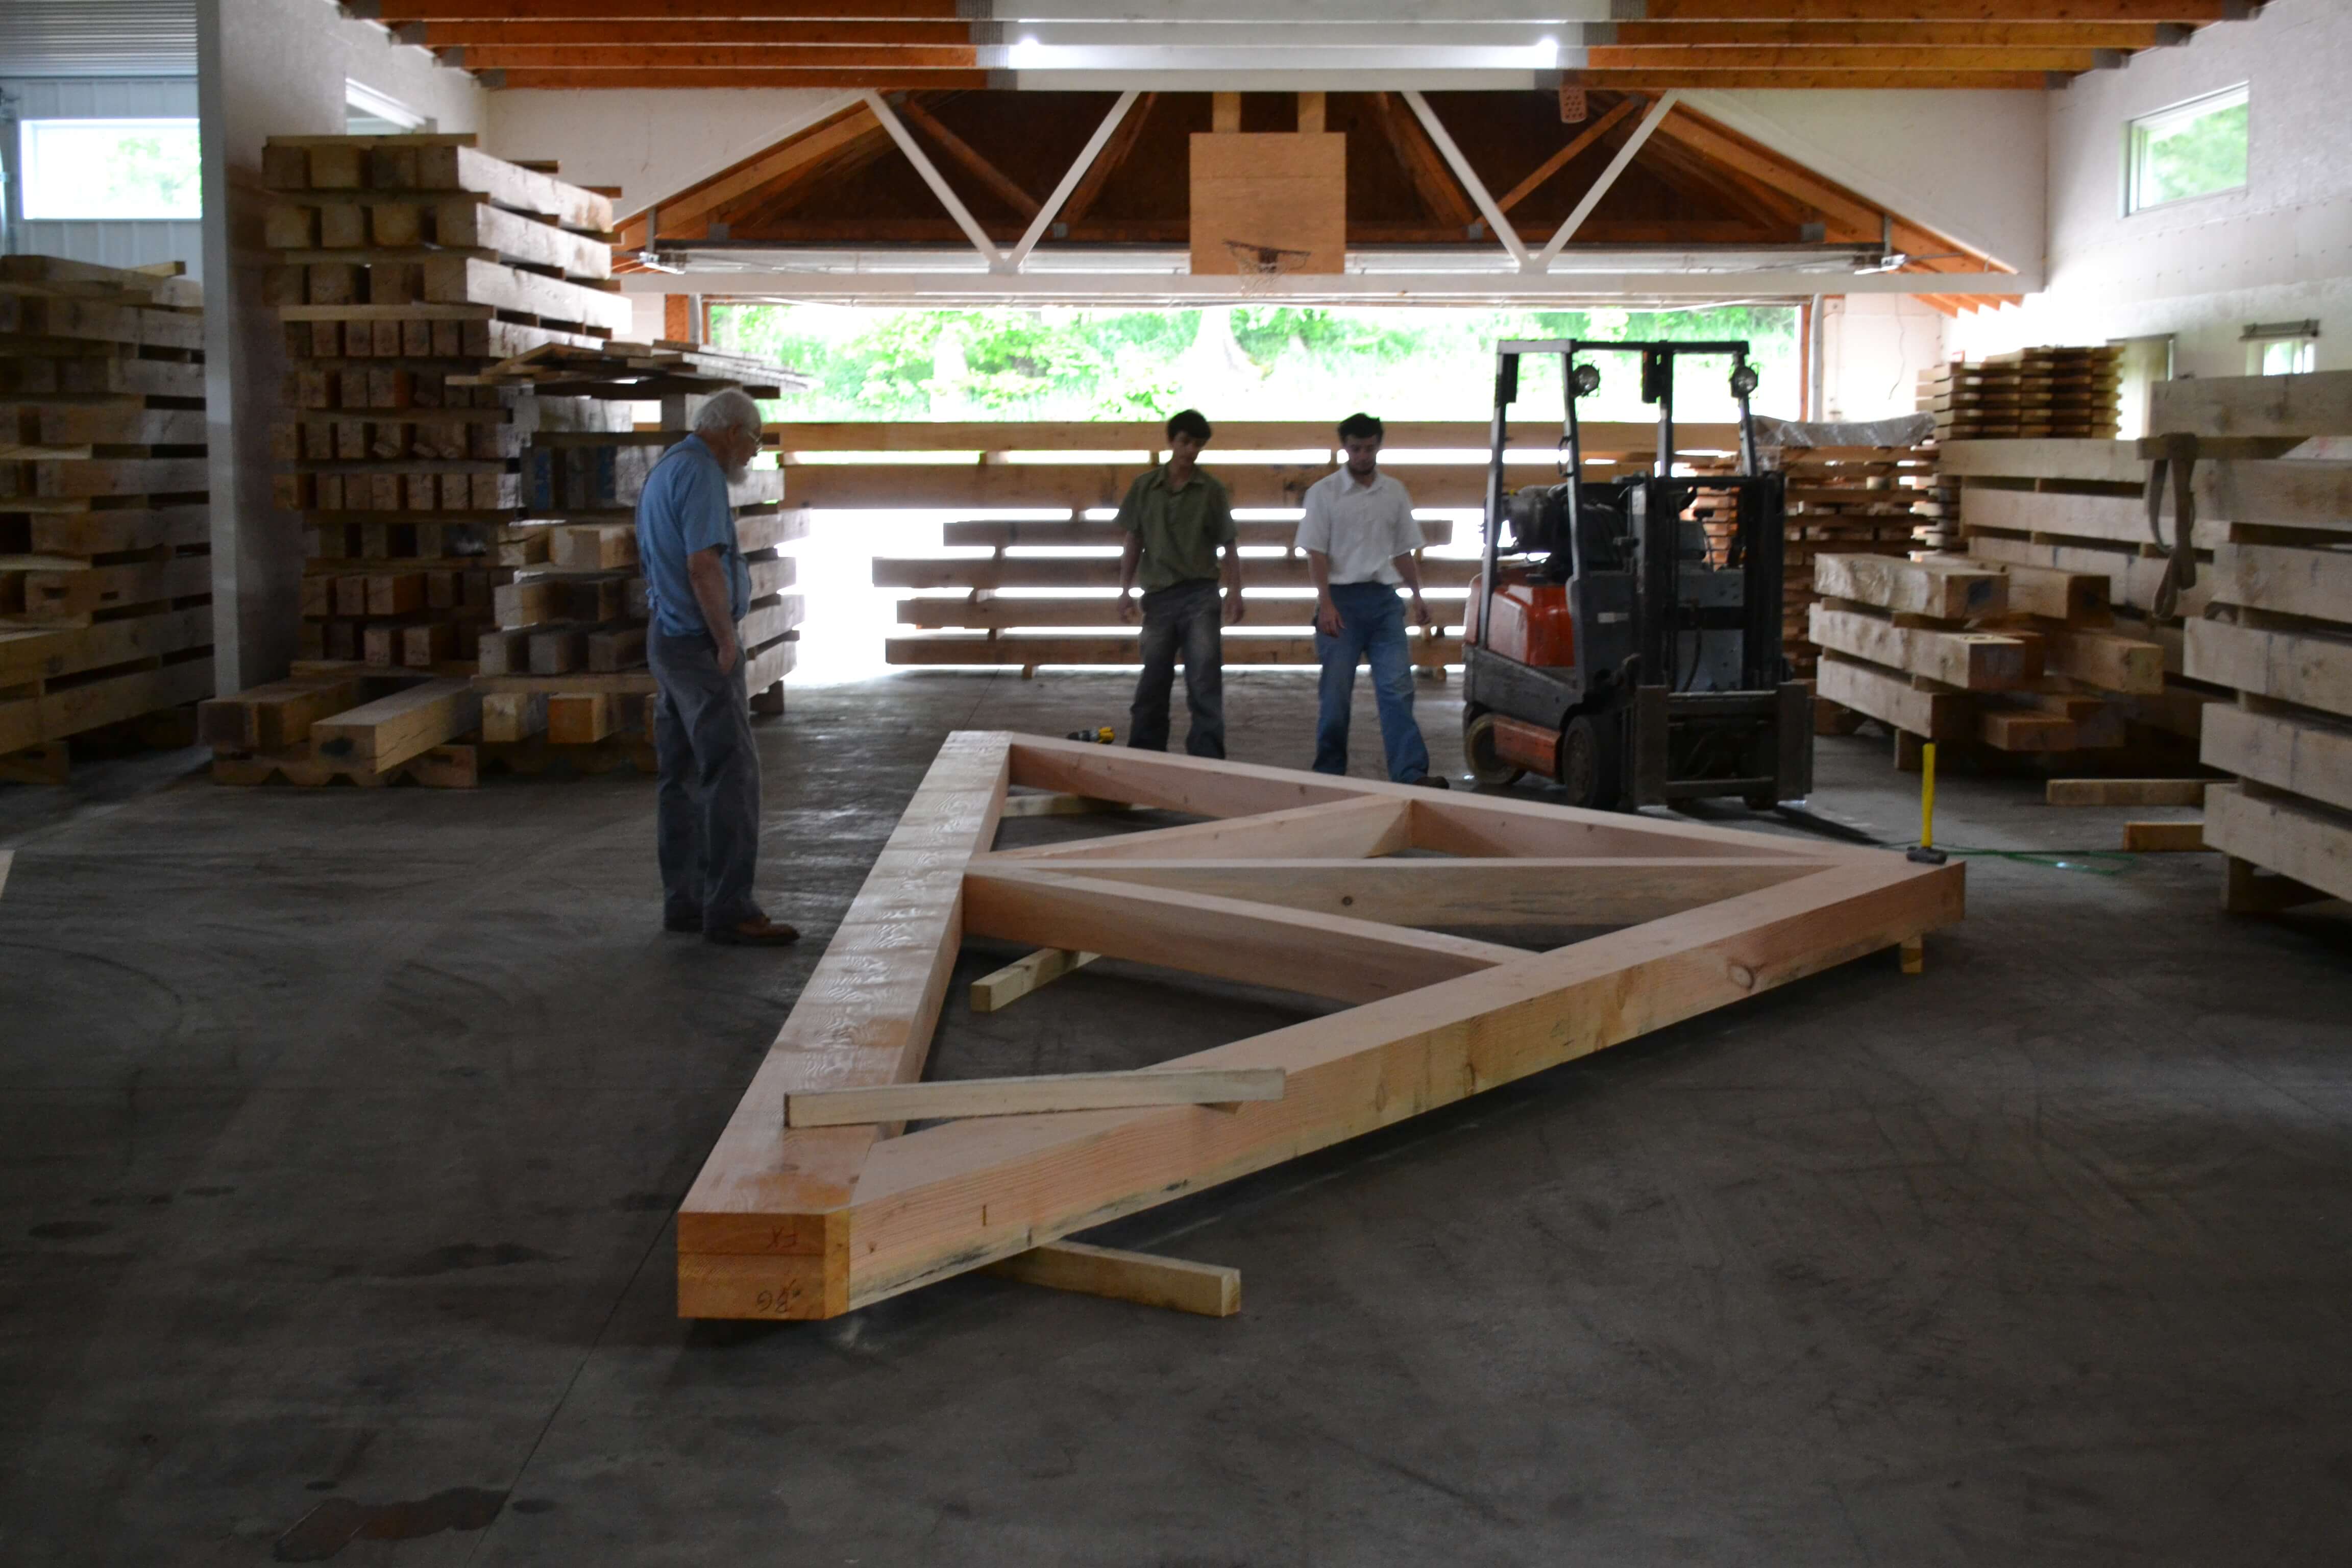 Amish craftsman build beams for the entrance to Fixari Family Dental of Lewis Center